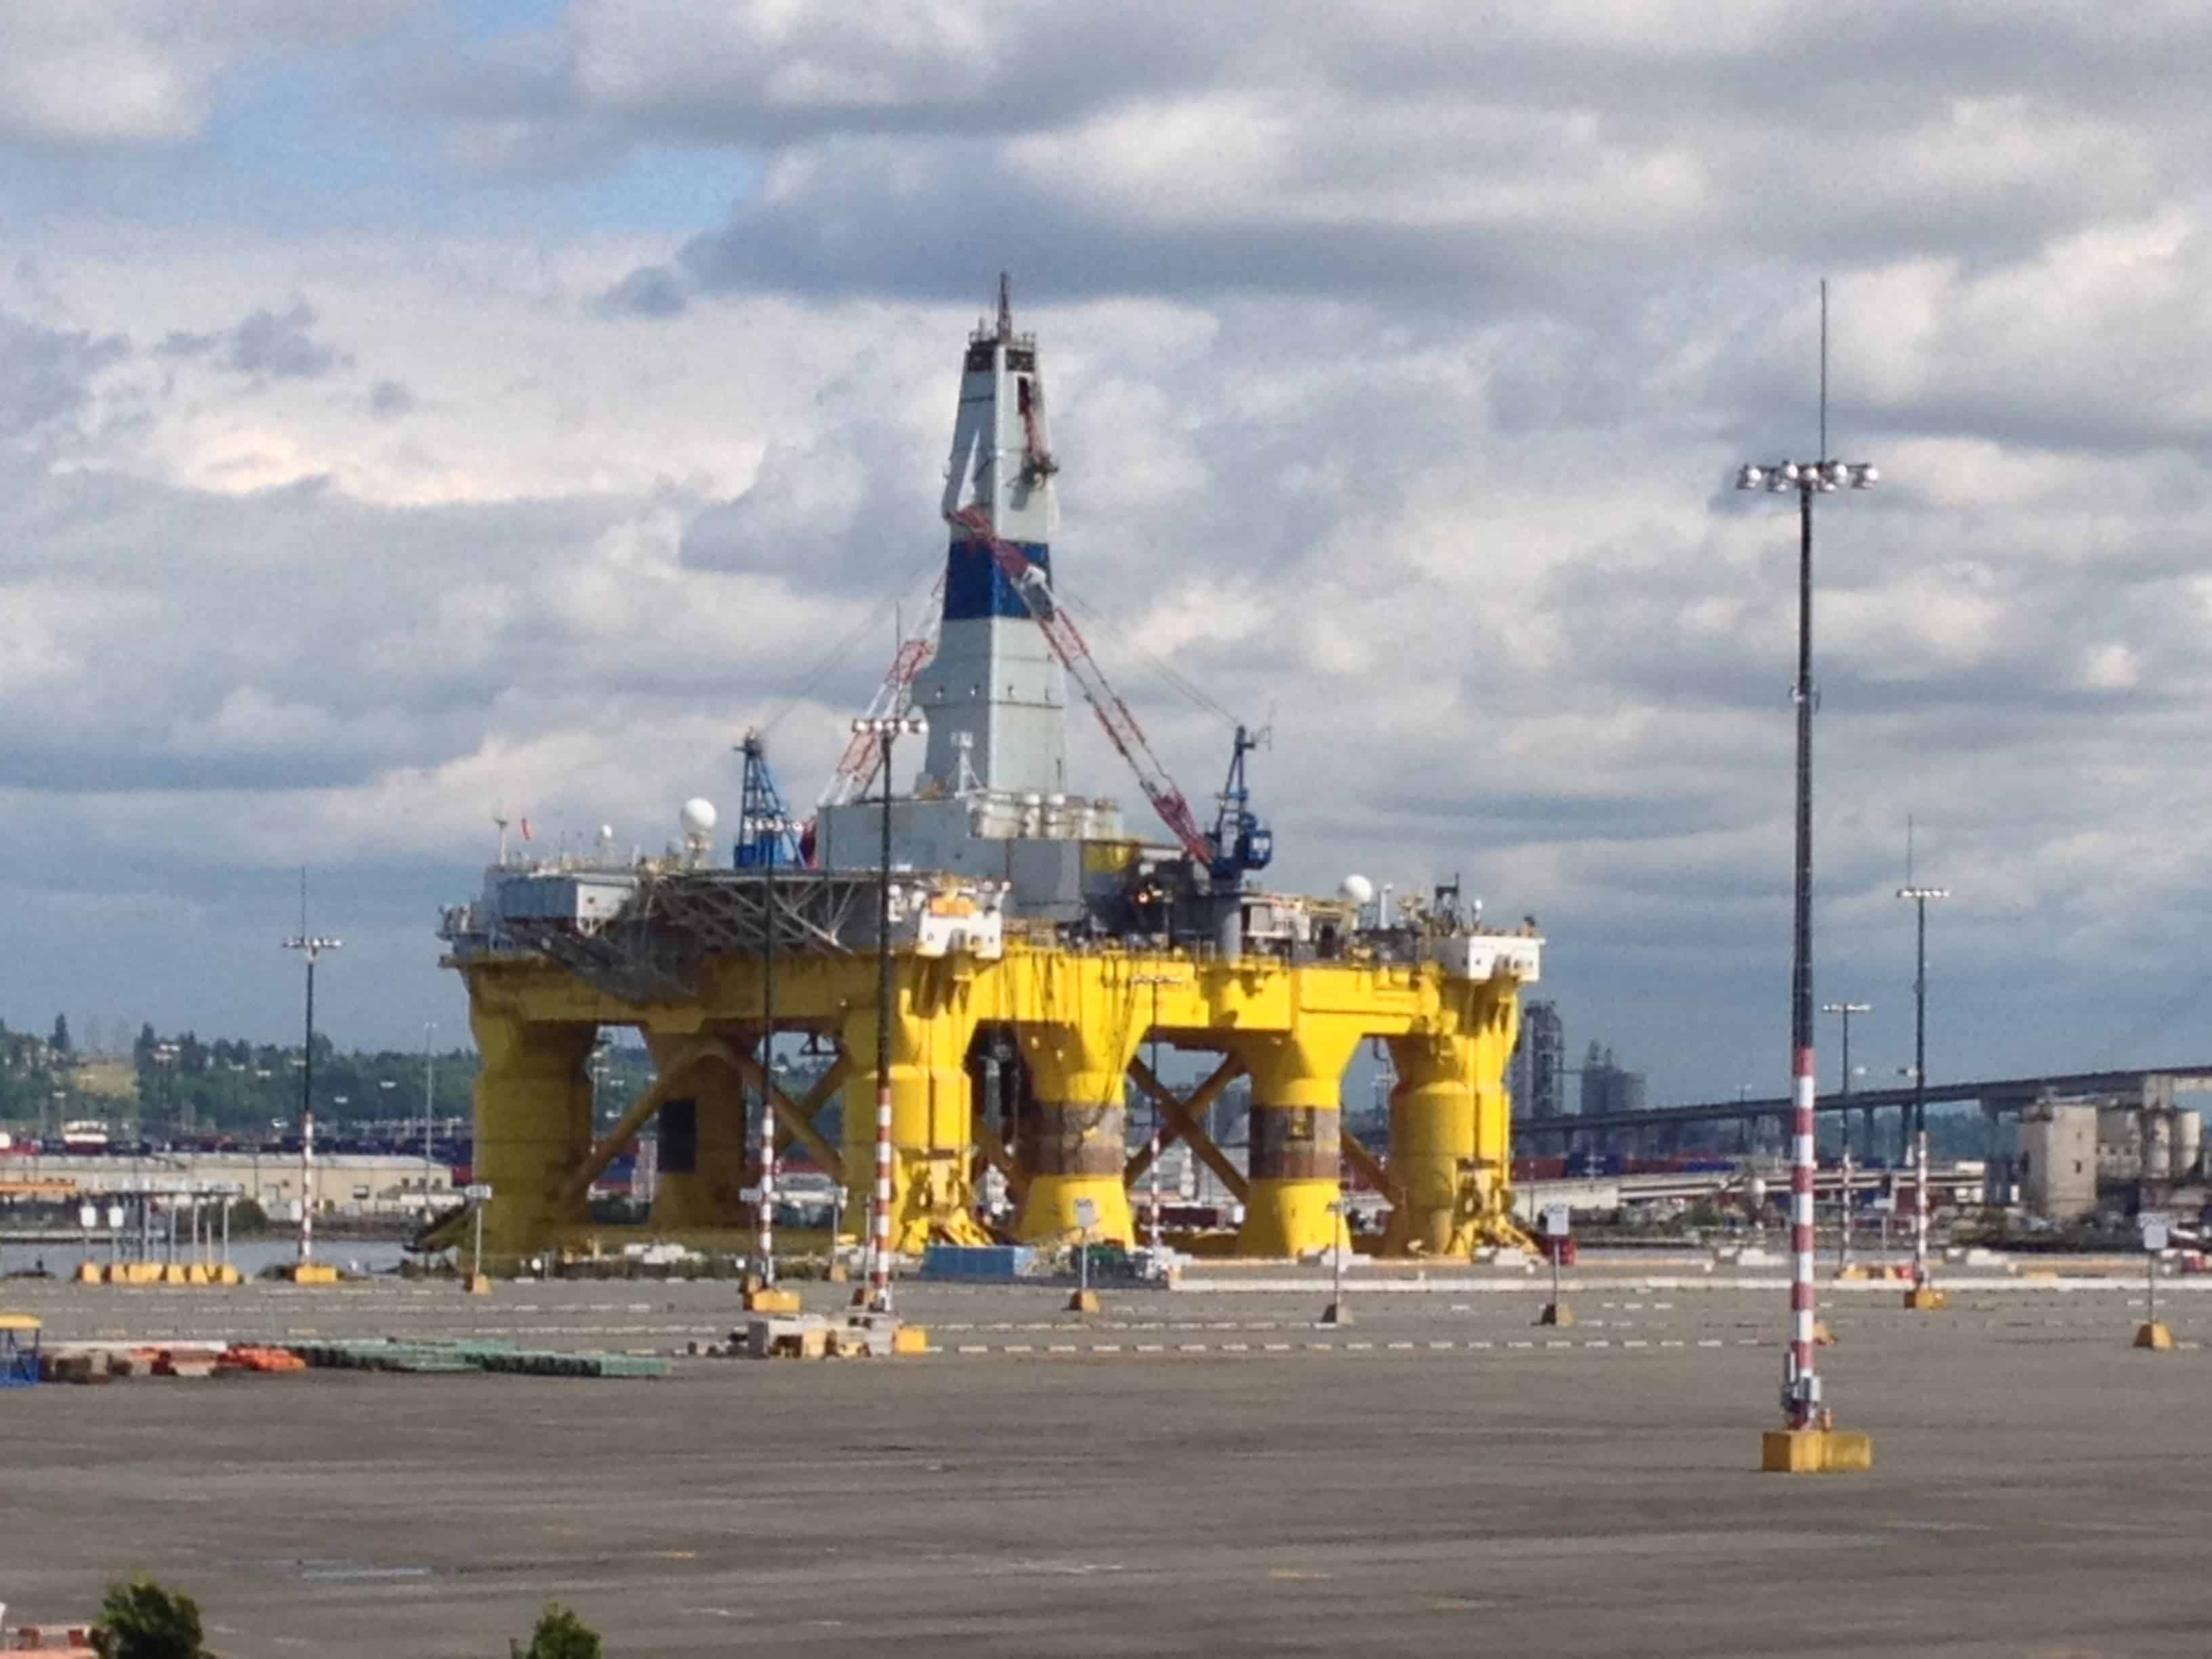 Shell Oil's Polar Pioneer Arctic Drilling Rig. Image credits: Chas Redmond.